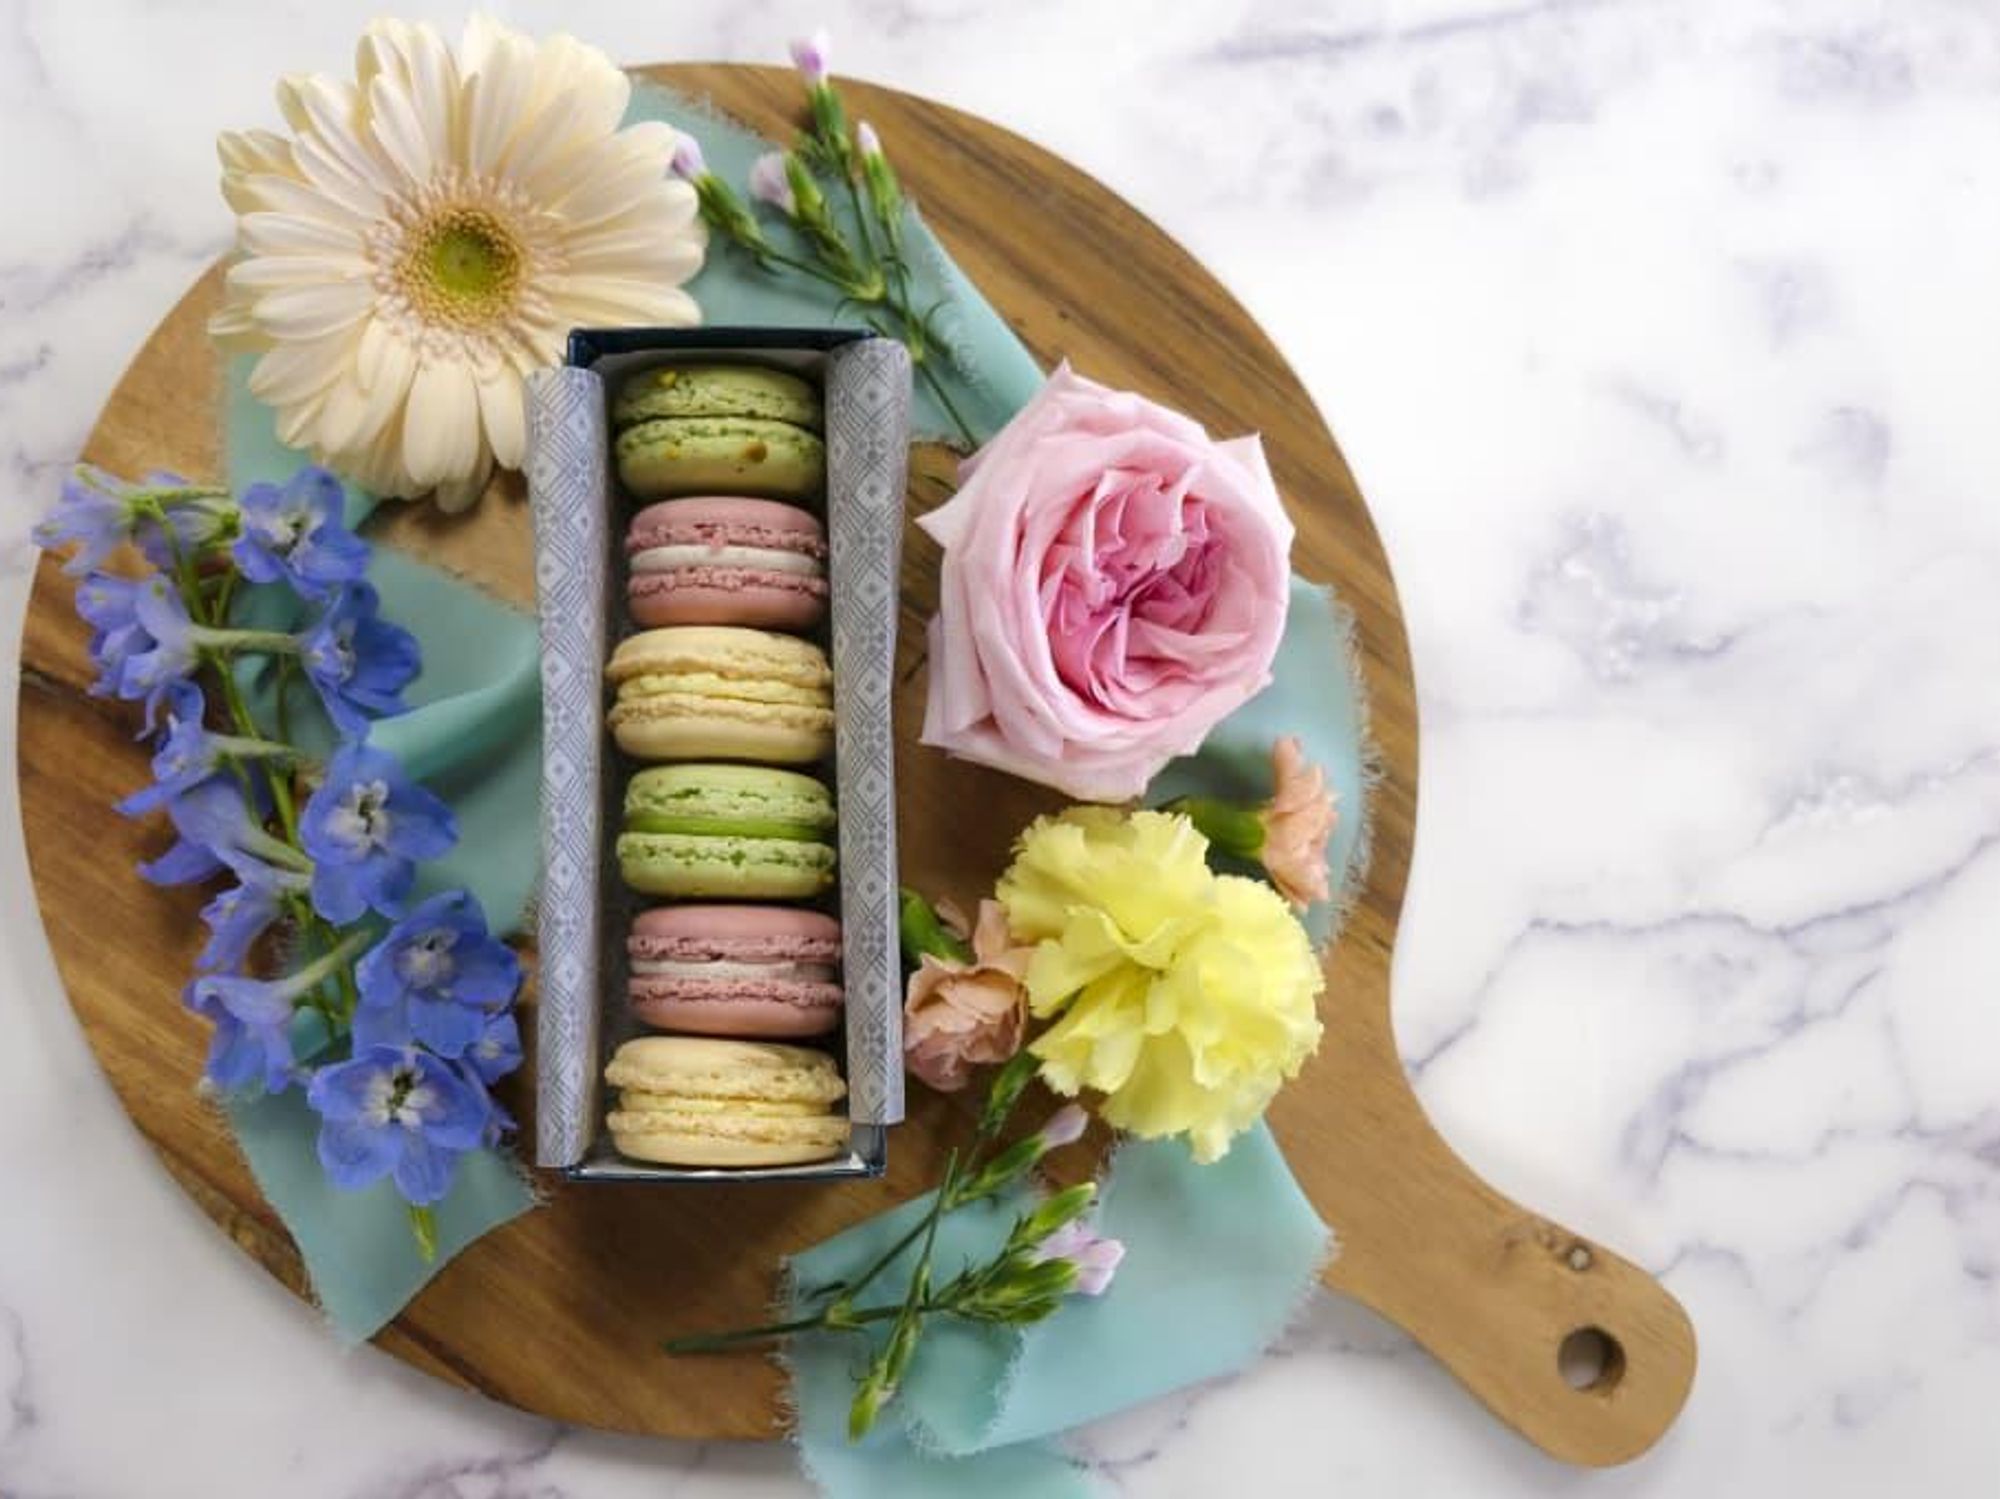 Macarons in pastel colors sit among flowers.